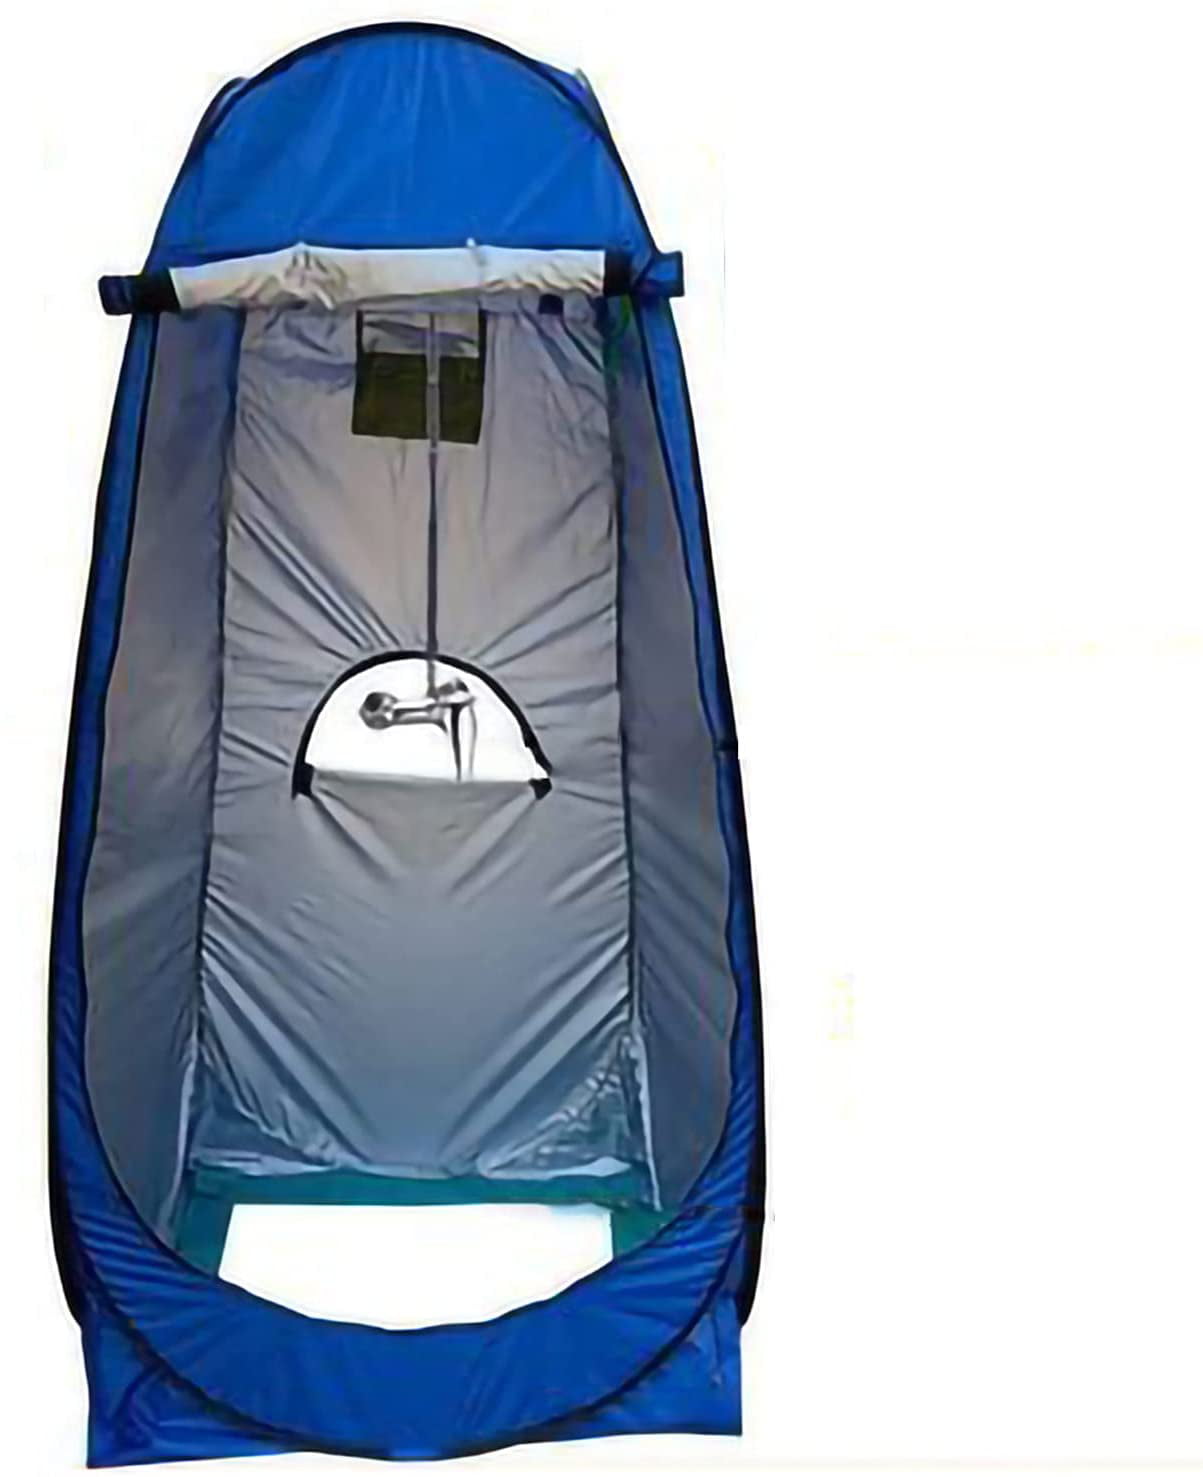 Instant Changing Room Camping Shower Tent Camp Toilet for Outdoors Hiking Foldable Sturdy Lightweight N/Y Portable Pop Up Tents Privacy Tents with 2 Windows Privacy Pop-Up Pod 